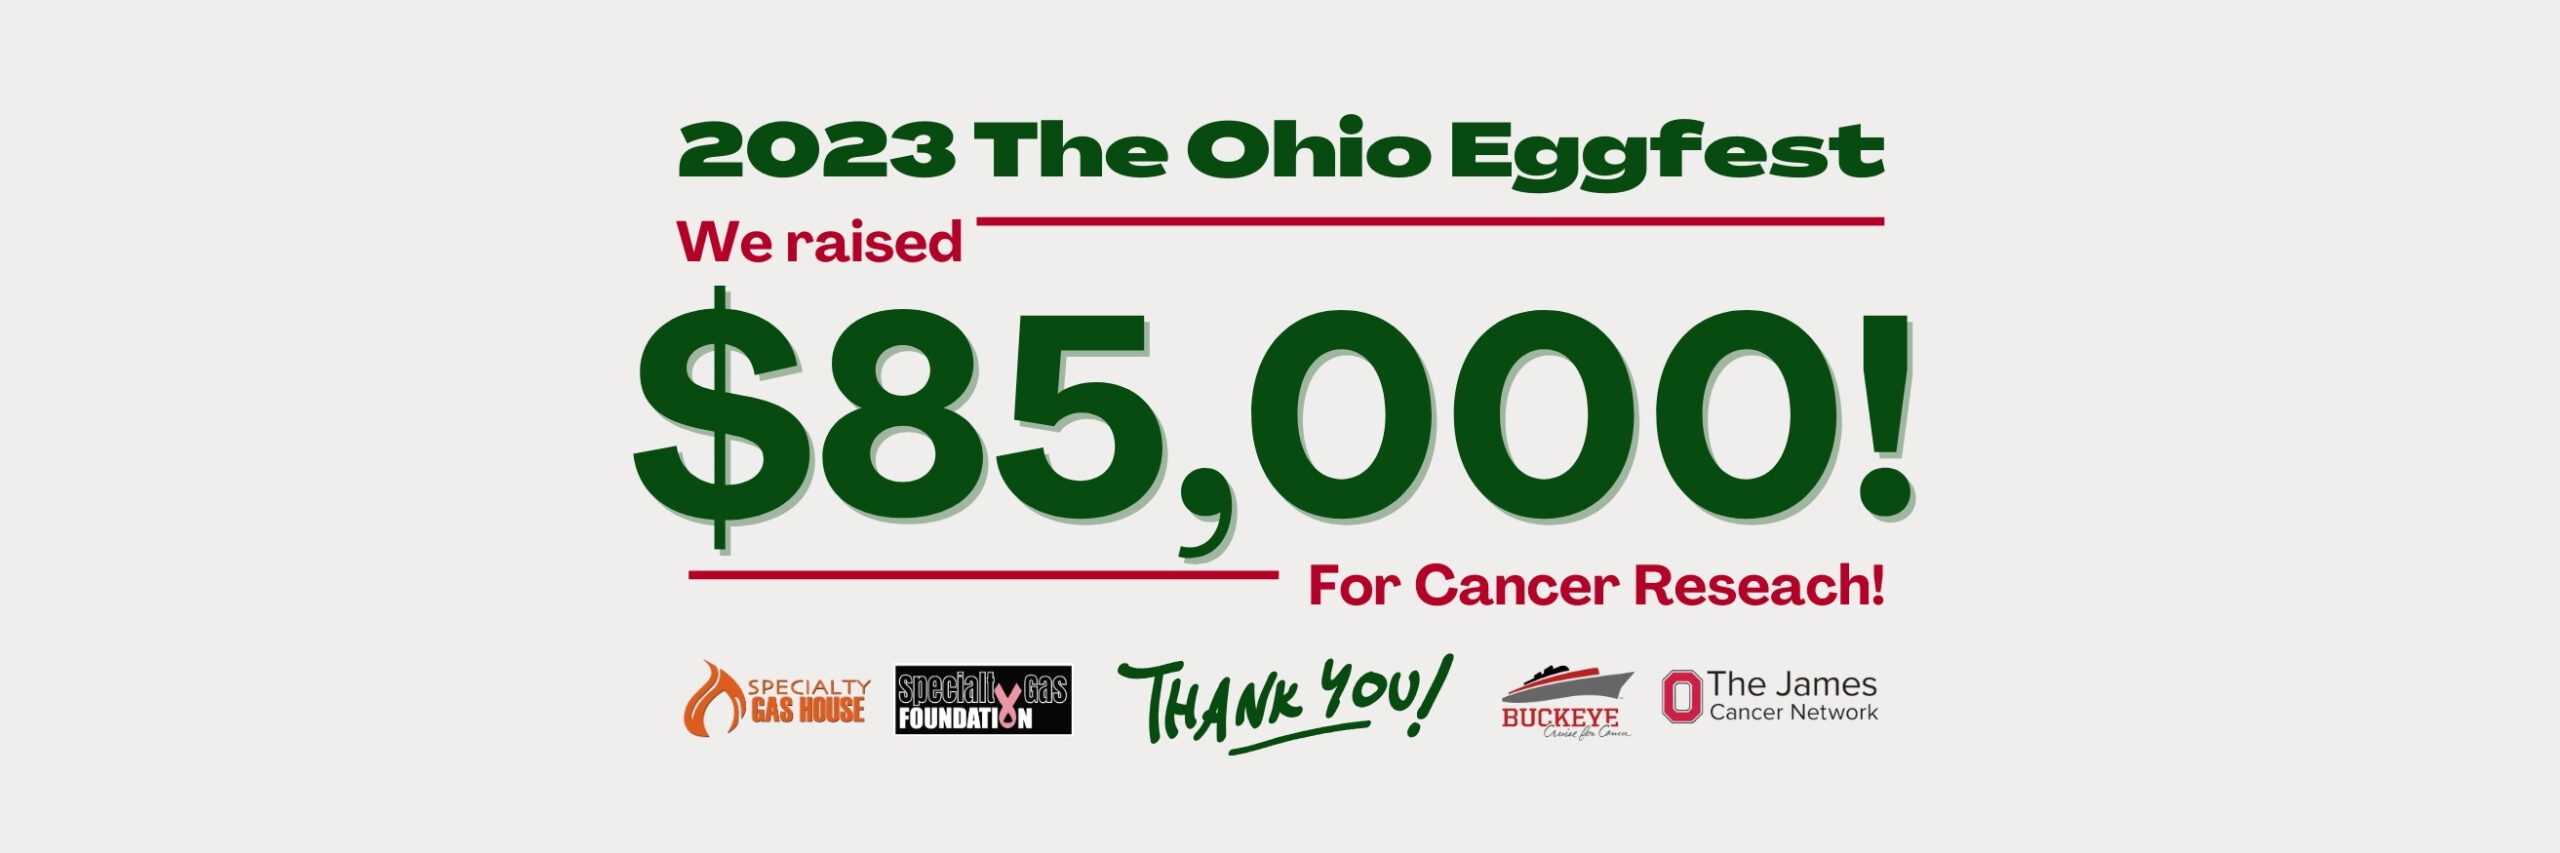 2022-ohio-eggfest-total-763-×-453-px-1920-×-1080-px-1500-x-500-px-scaled